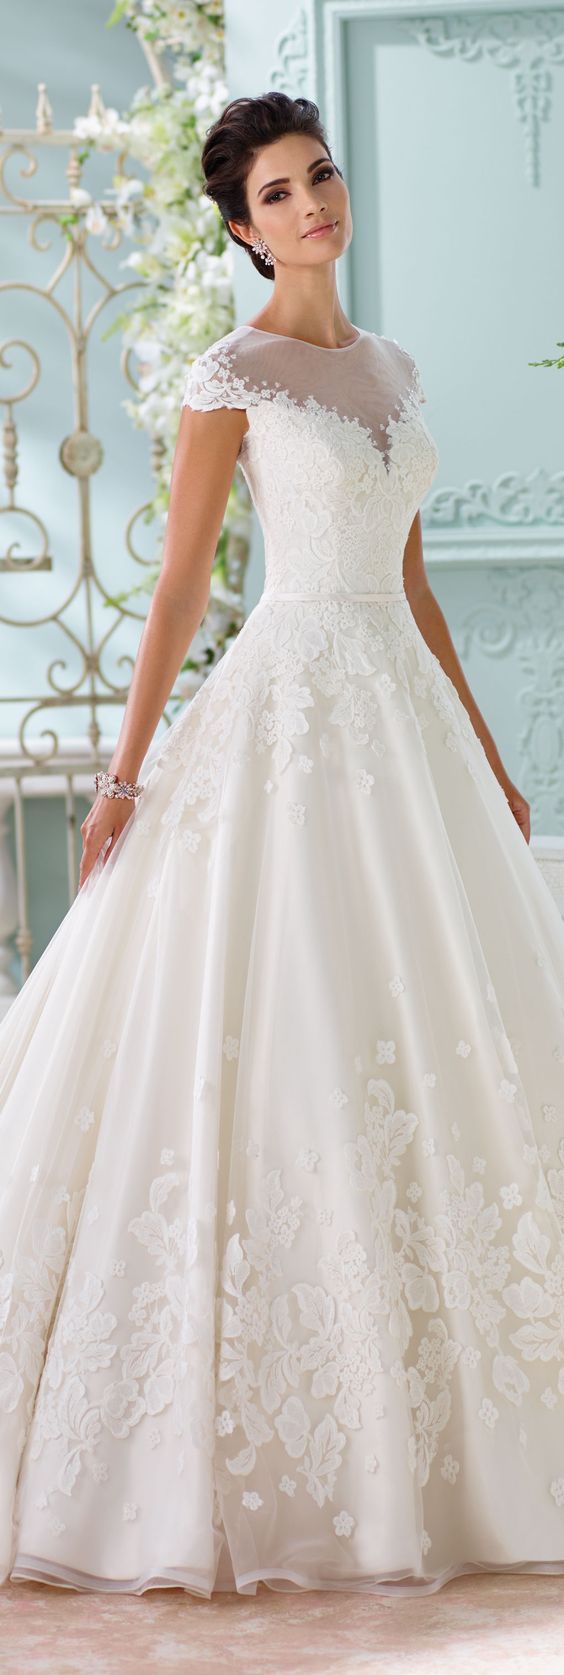 Wedding - Bridal Gown With Cap Sleeves